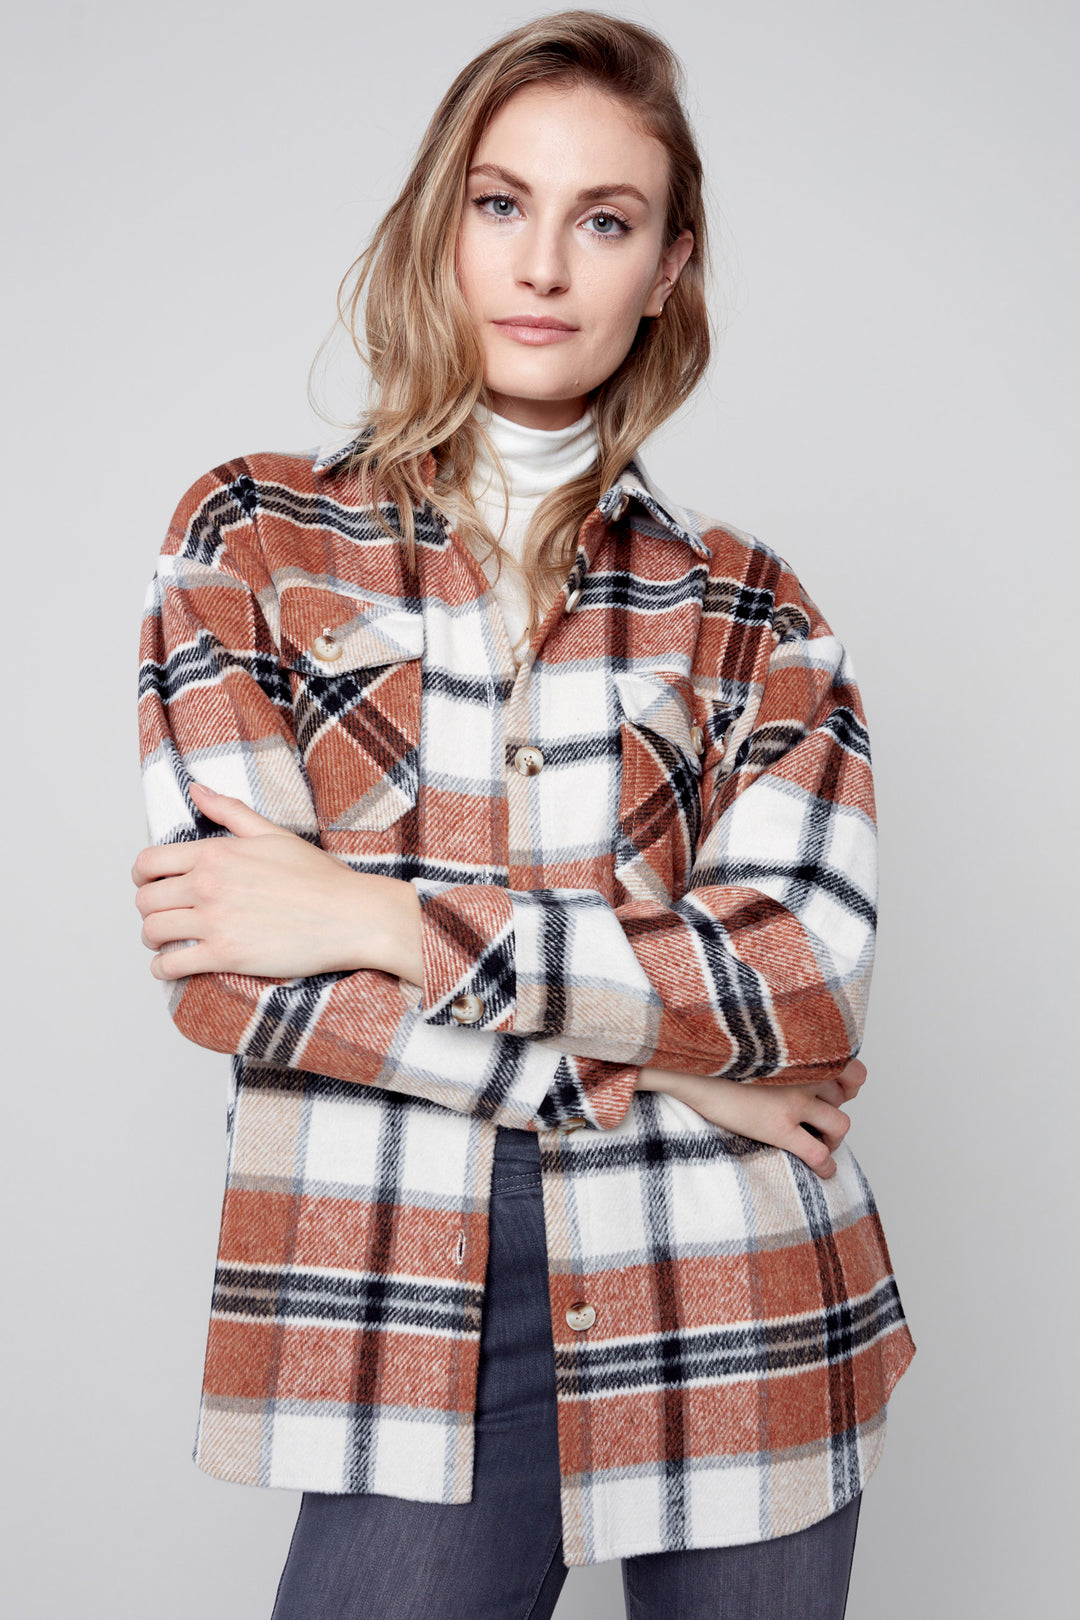 Crafted from the softest plaid flannel, this shirt jacket features a button-down front and chest flap pockets for a classic look that will always be in fashion.